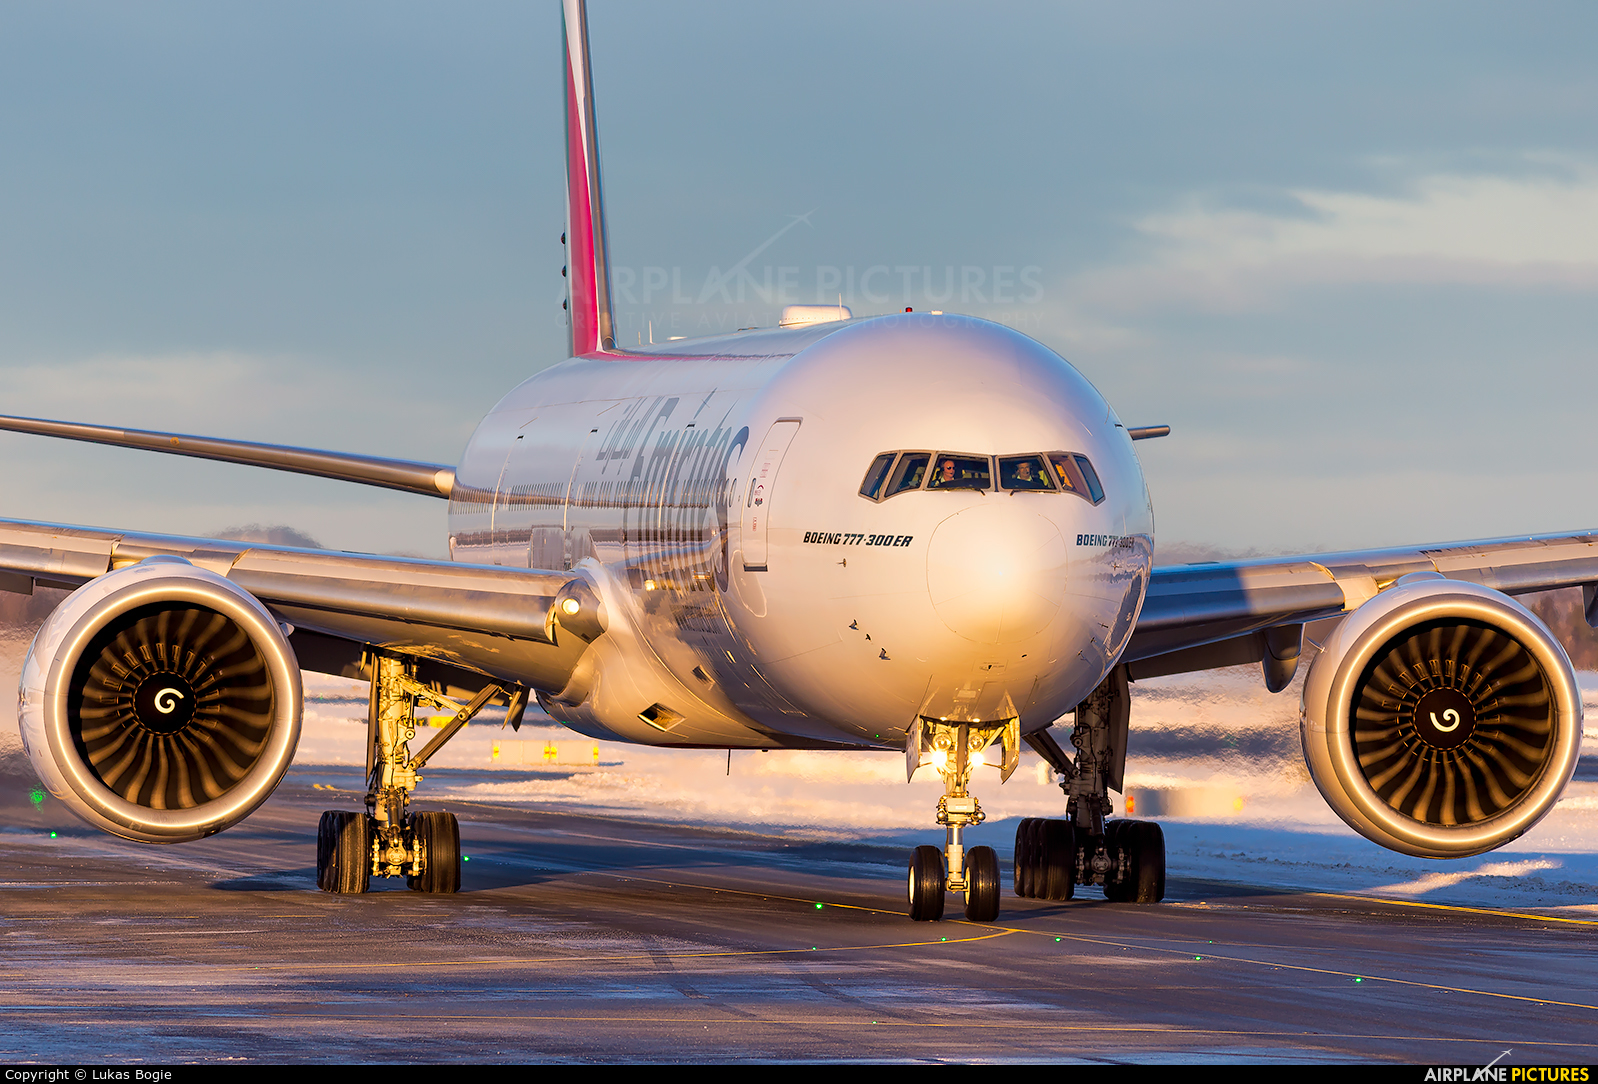 Emirates Airlines A6-EBP aircraft at Oslo - Gardermoen